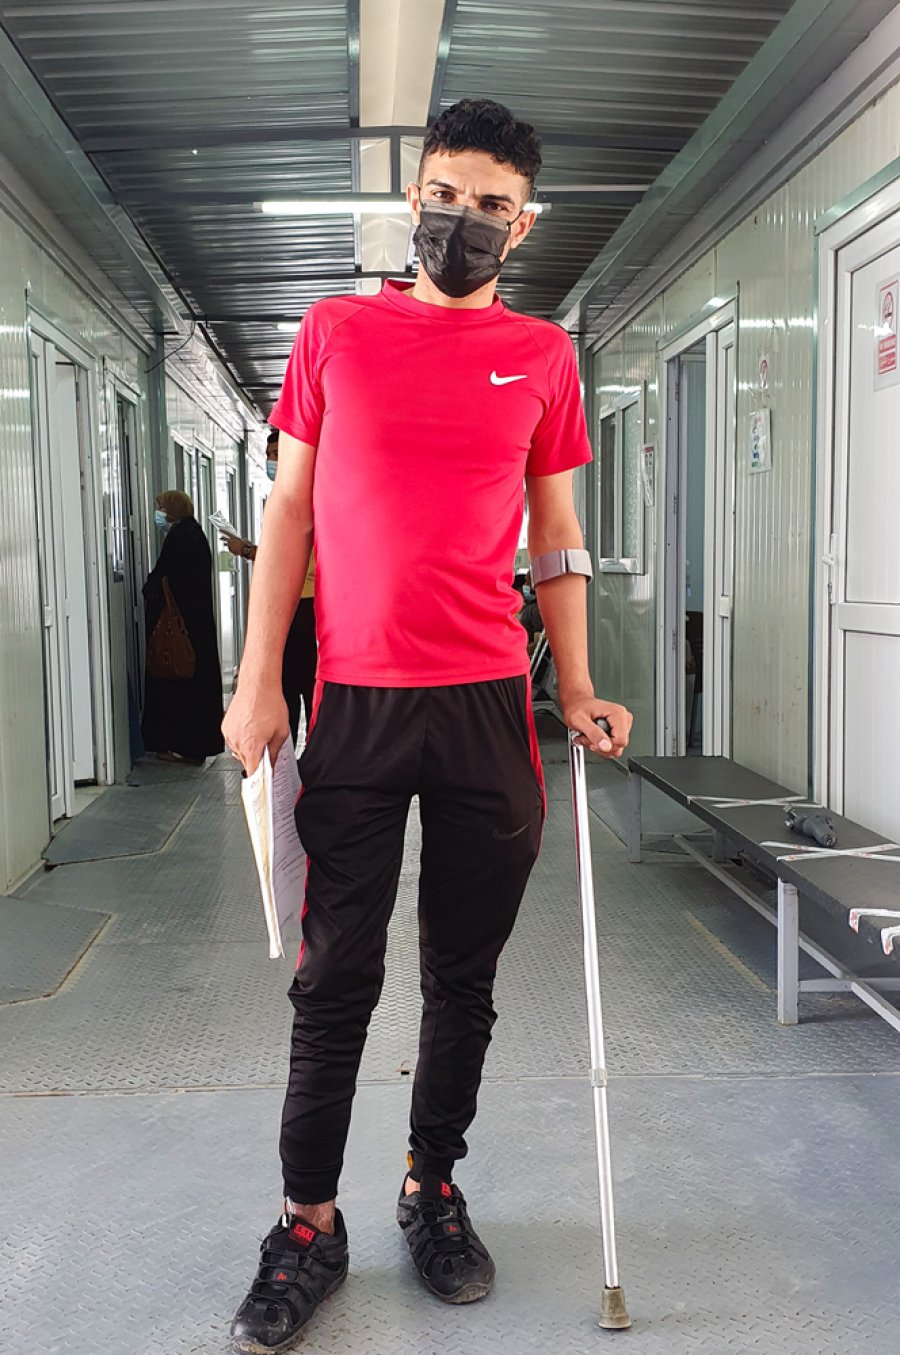 Saqr Badr standing in the outpatient department in al-Wahda hospital in East Mosul after visiting for follow up after being discharged from the facility. 